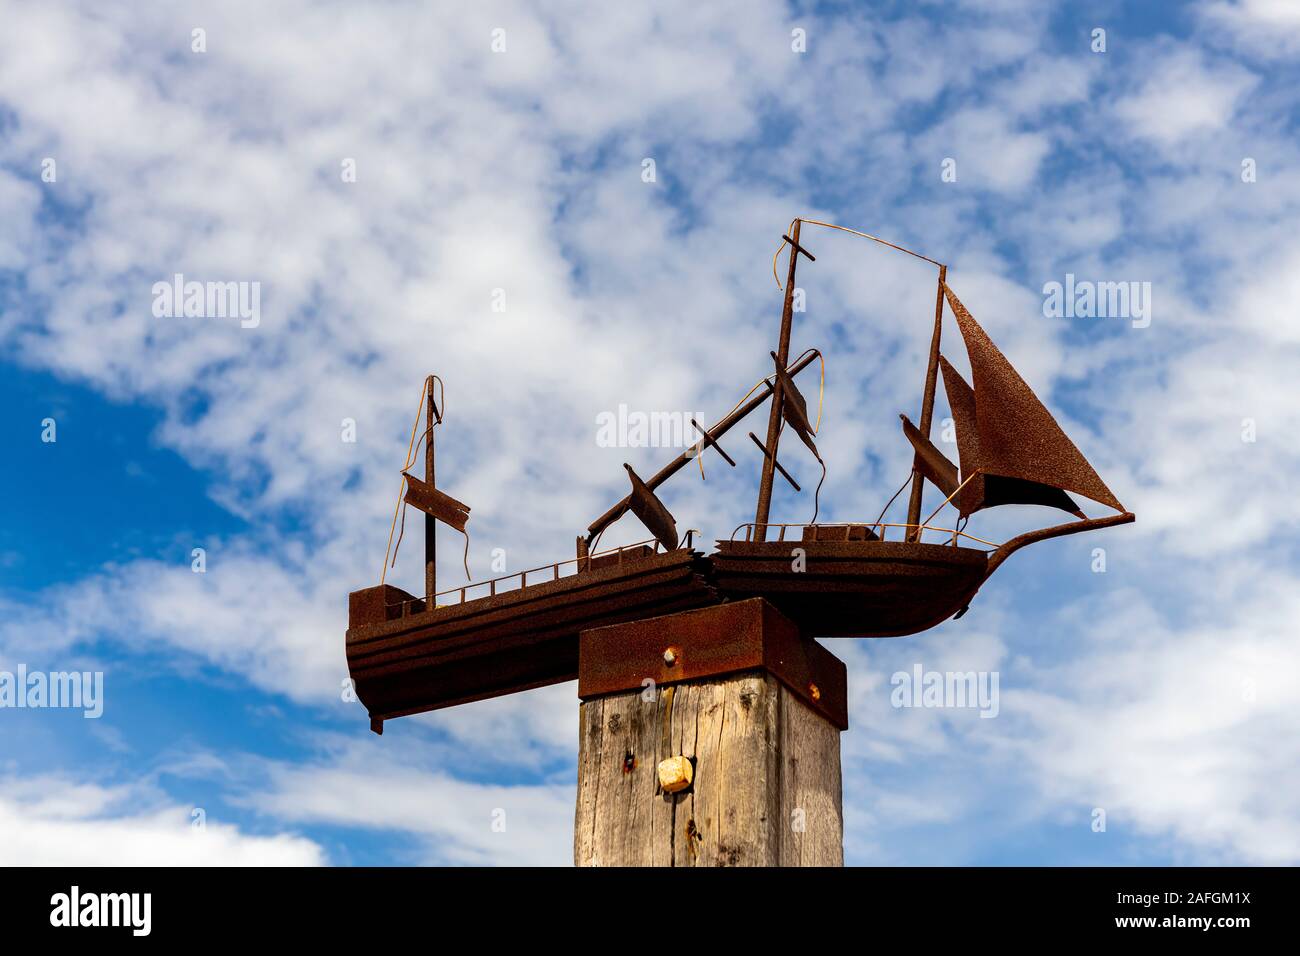 An outdoor sculpture of a rusted wooden sailing boat sits on top of a wooden pole at Port Germein jetty in South Australia Stock Photo